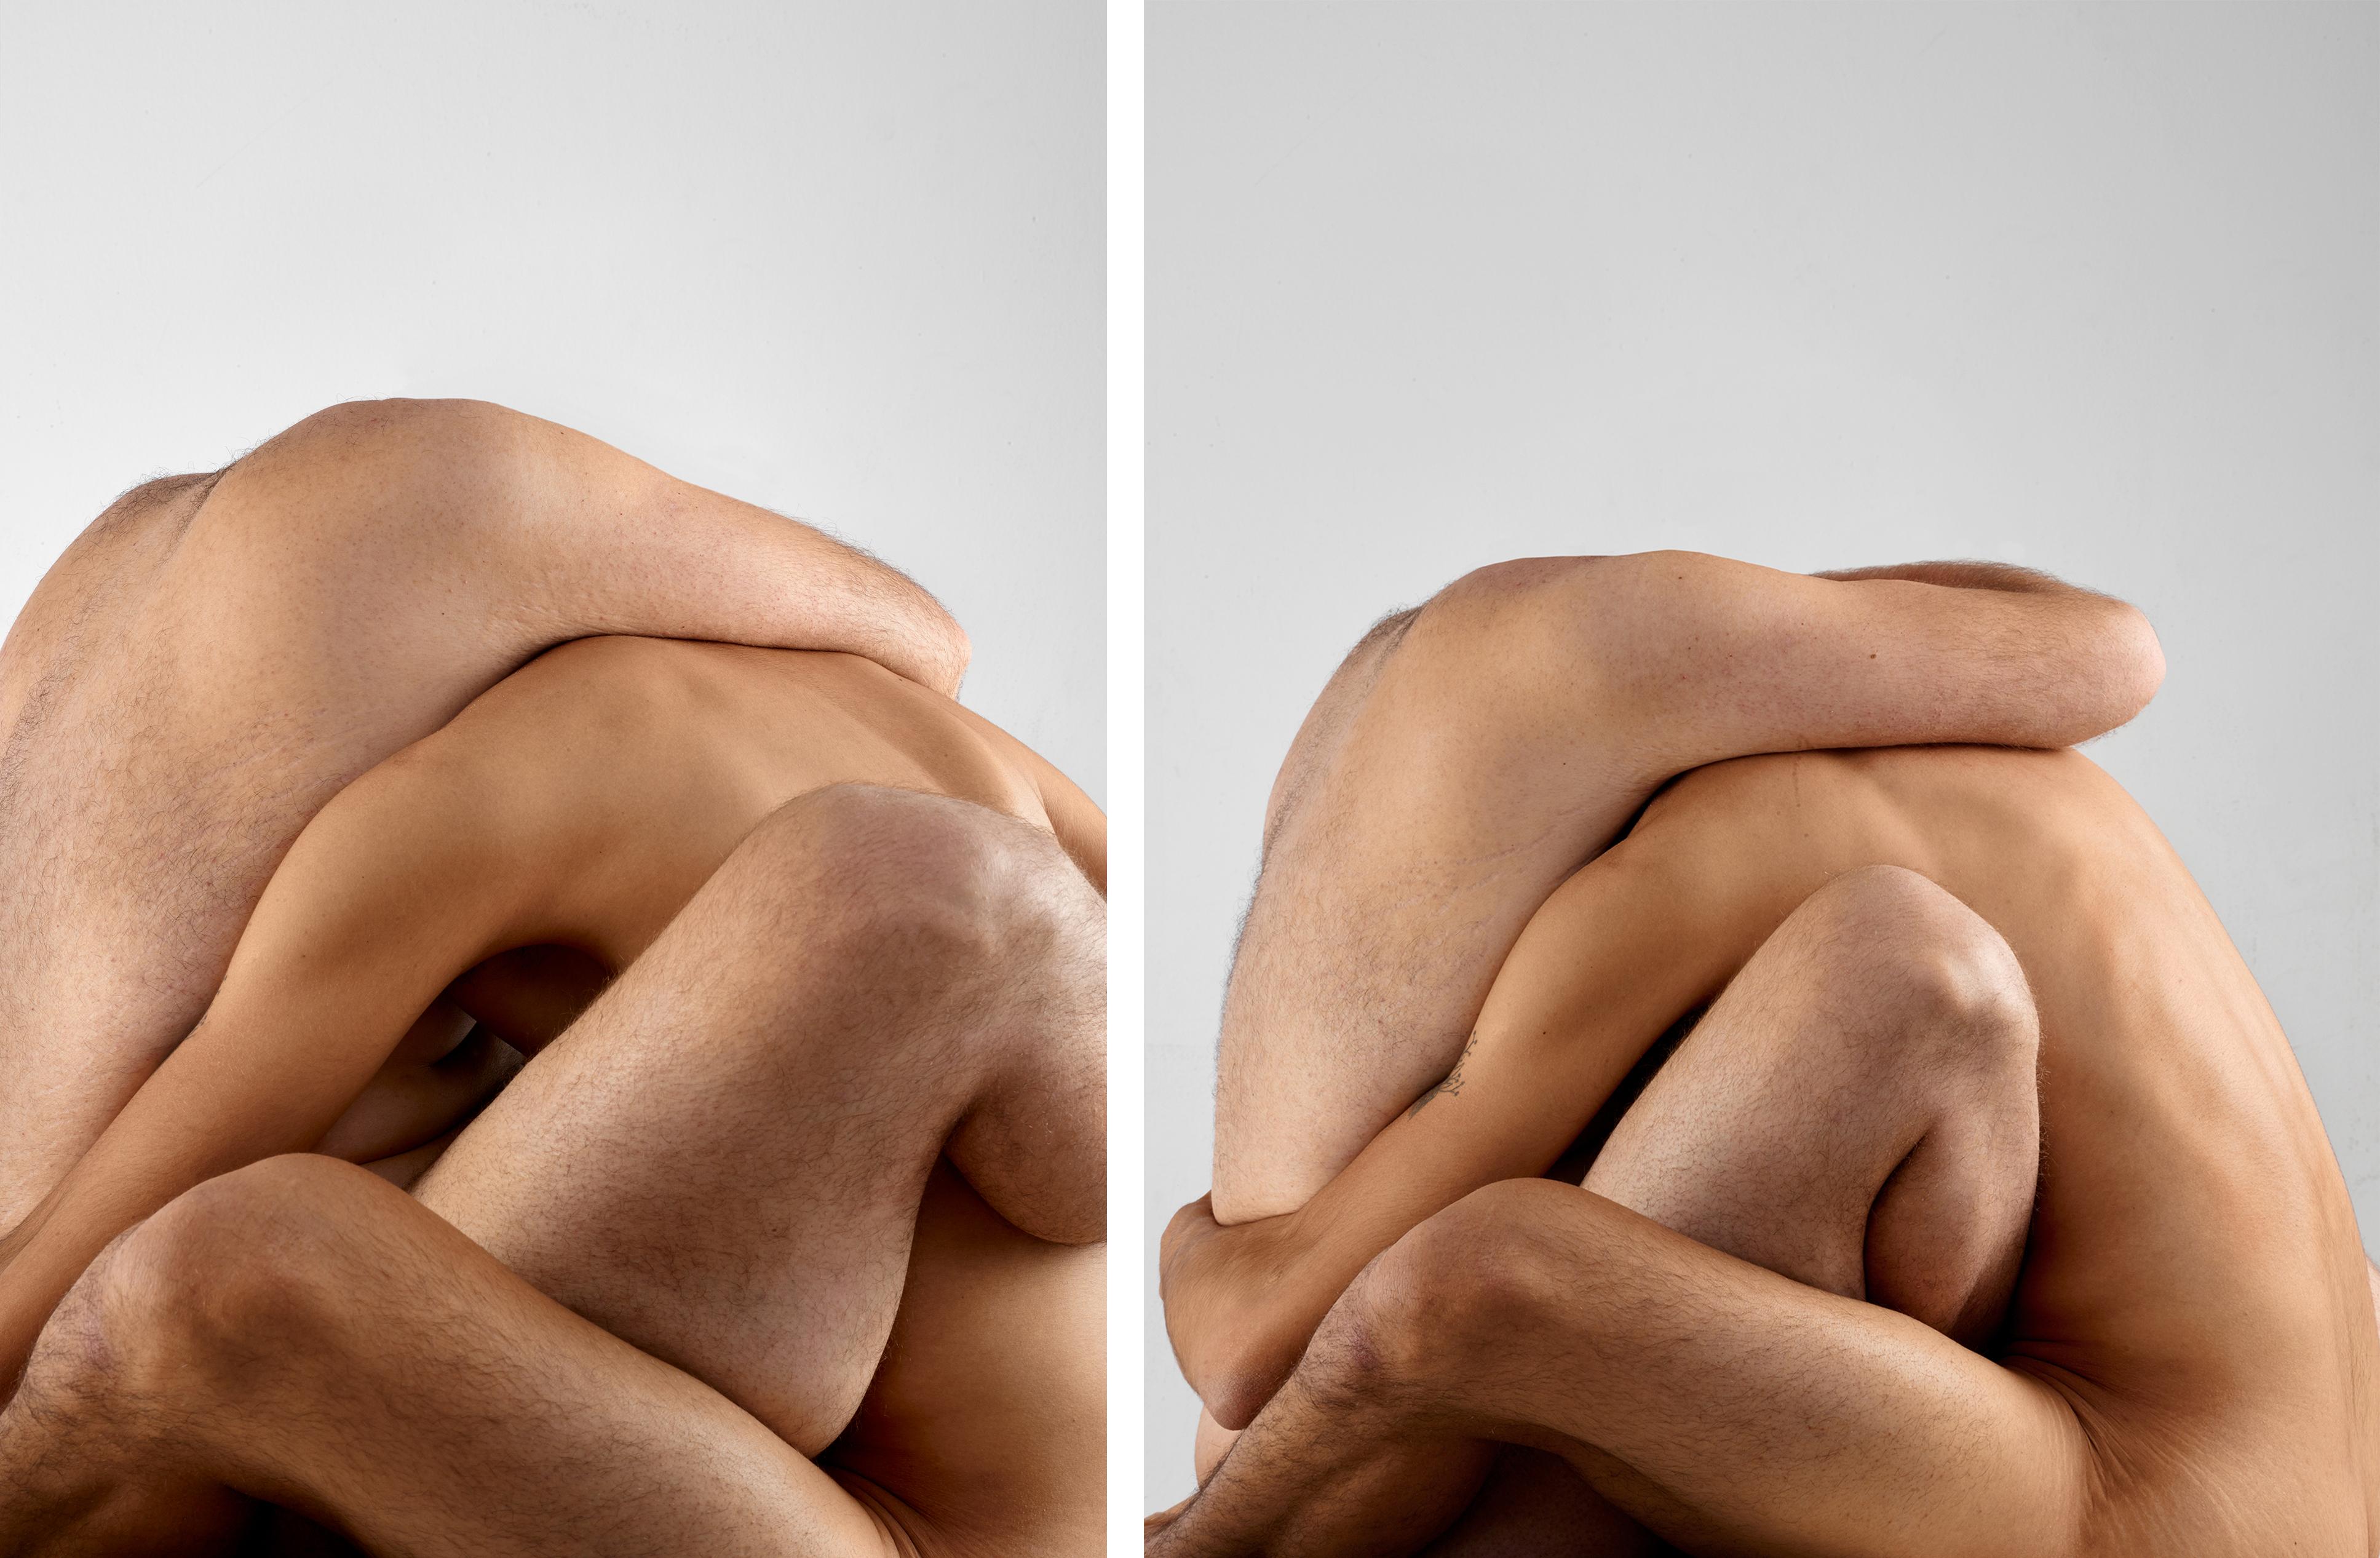 Javier Rey Color Photograph - Amorphism, Juntos. Diptych. Color abstract nude photograph 